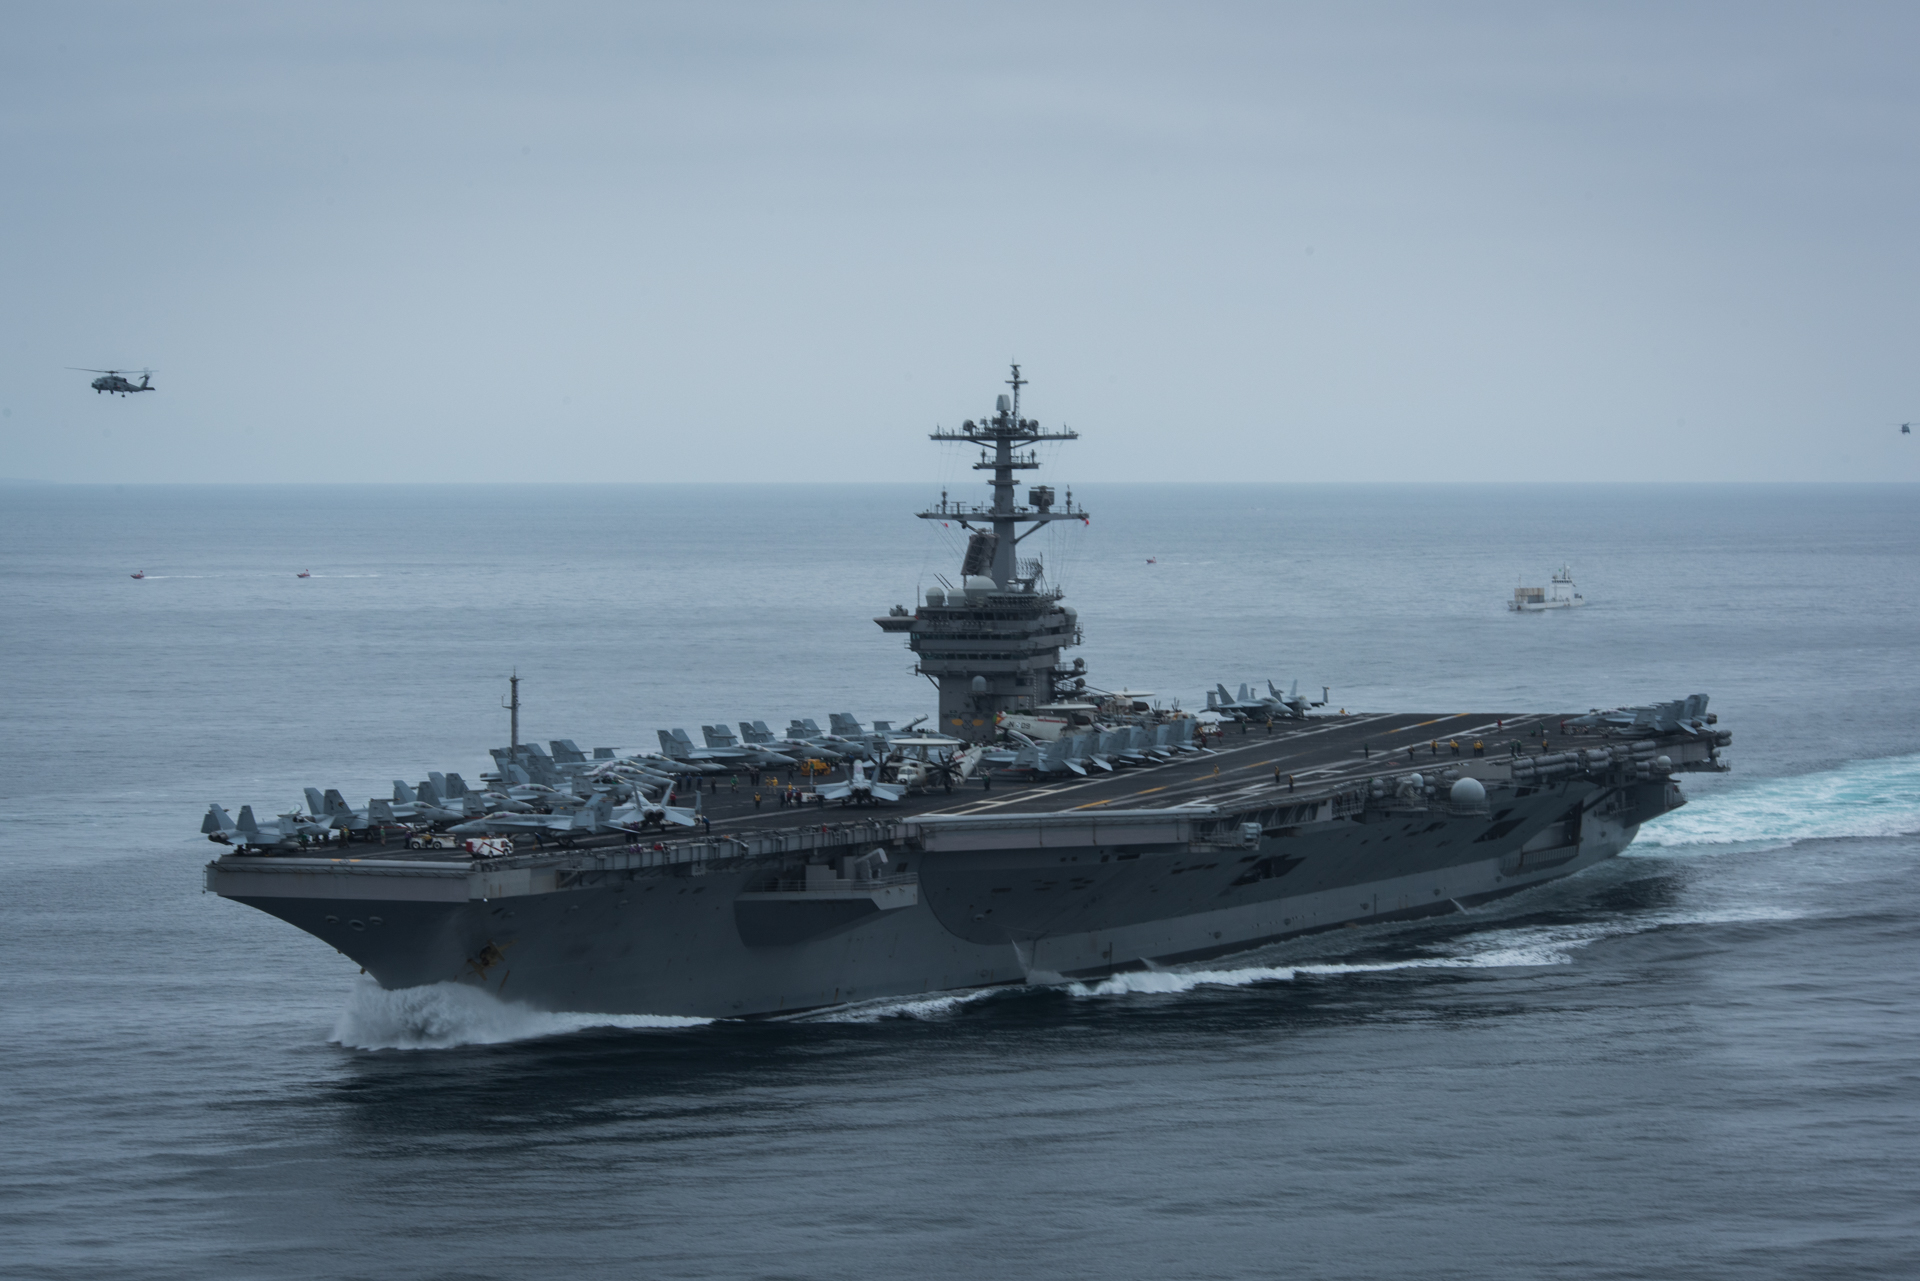 PACIFIC OCEAN (Aug. 6, 2017) The aircraft carrier USS Theodore Roosevelt (CVN 71) participates in a strait transit exercise with ships from its carrier strike group (CSG). Theodore Roosevelt is underway conducting a composite training unit exercise (COMPTUEX) with its CSG in preparation for an upcoming deployment. COMPTUEX tests a carrier strike group's mission-readiness and ability to perform as an integrated unit through simulated real-world scenarios. U.S. Navy photo by Mass Communication Specialist 3rd Class Anthony J. Rivera. -